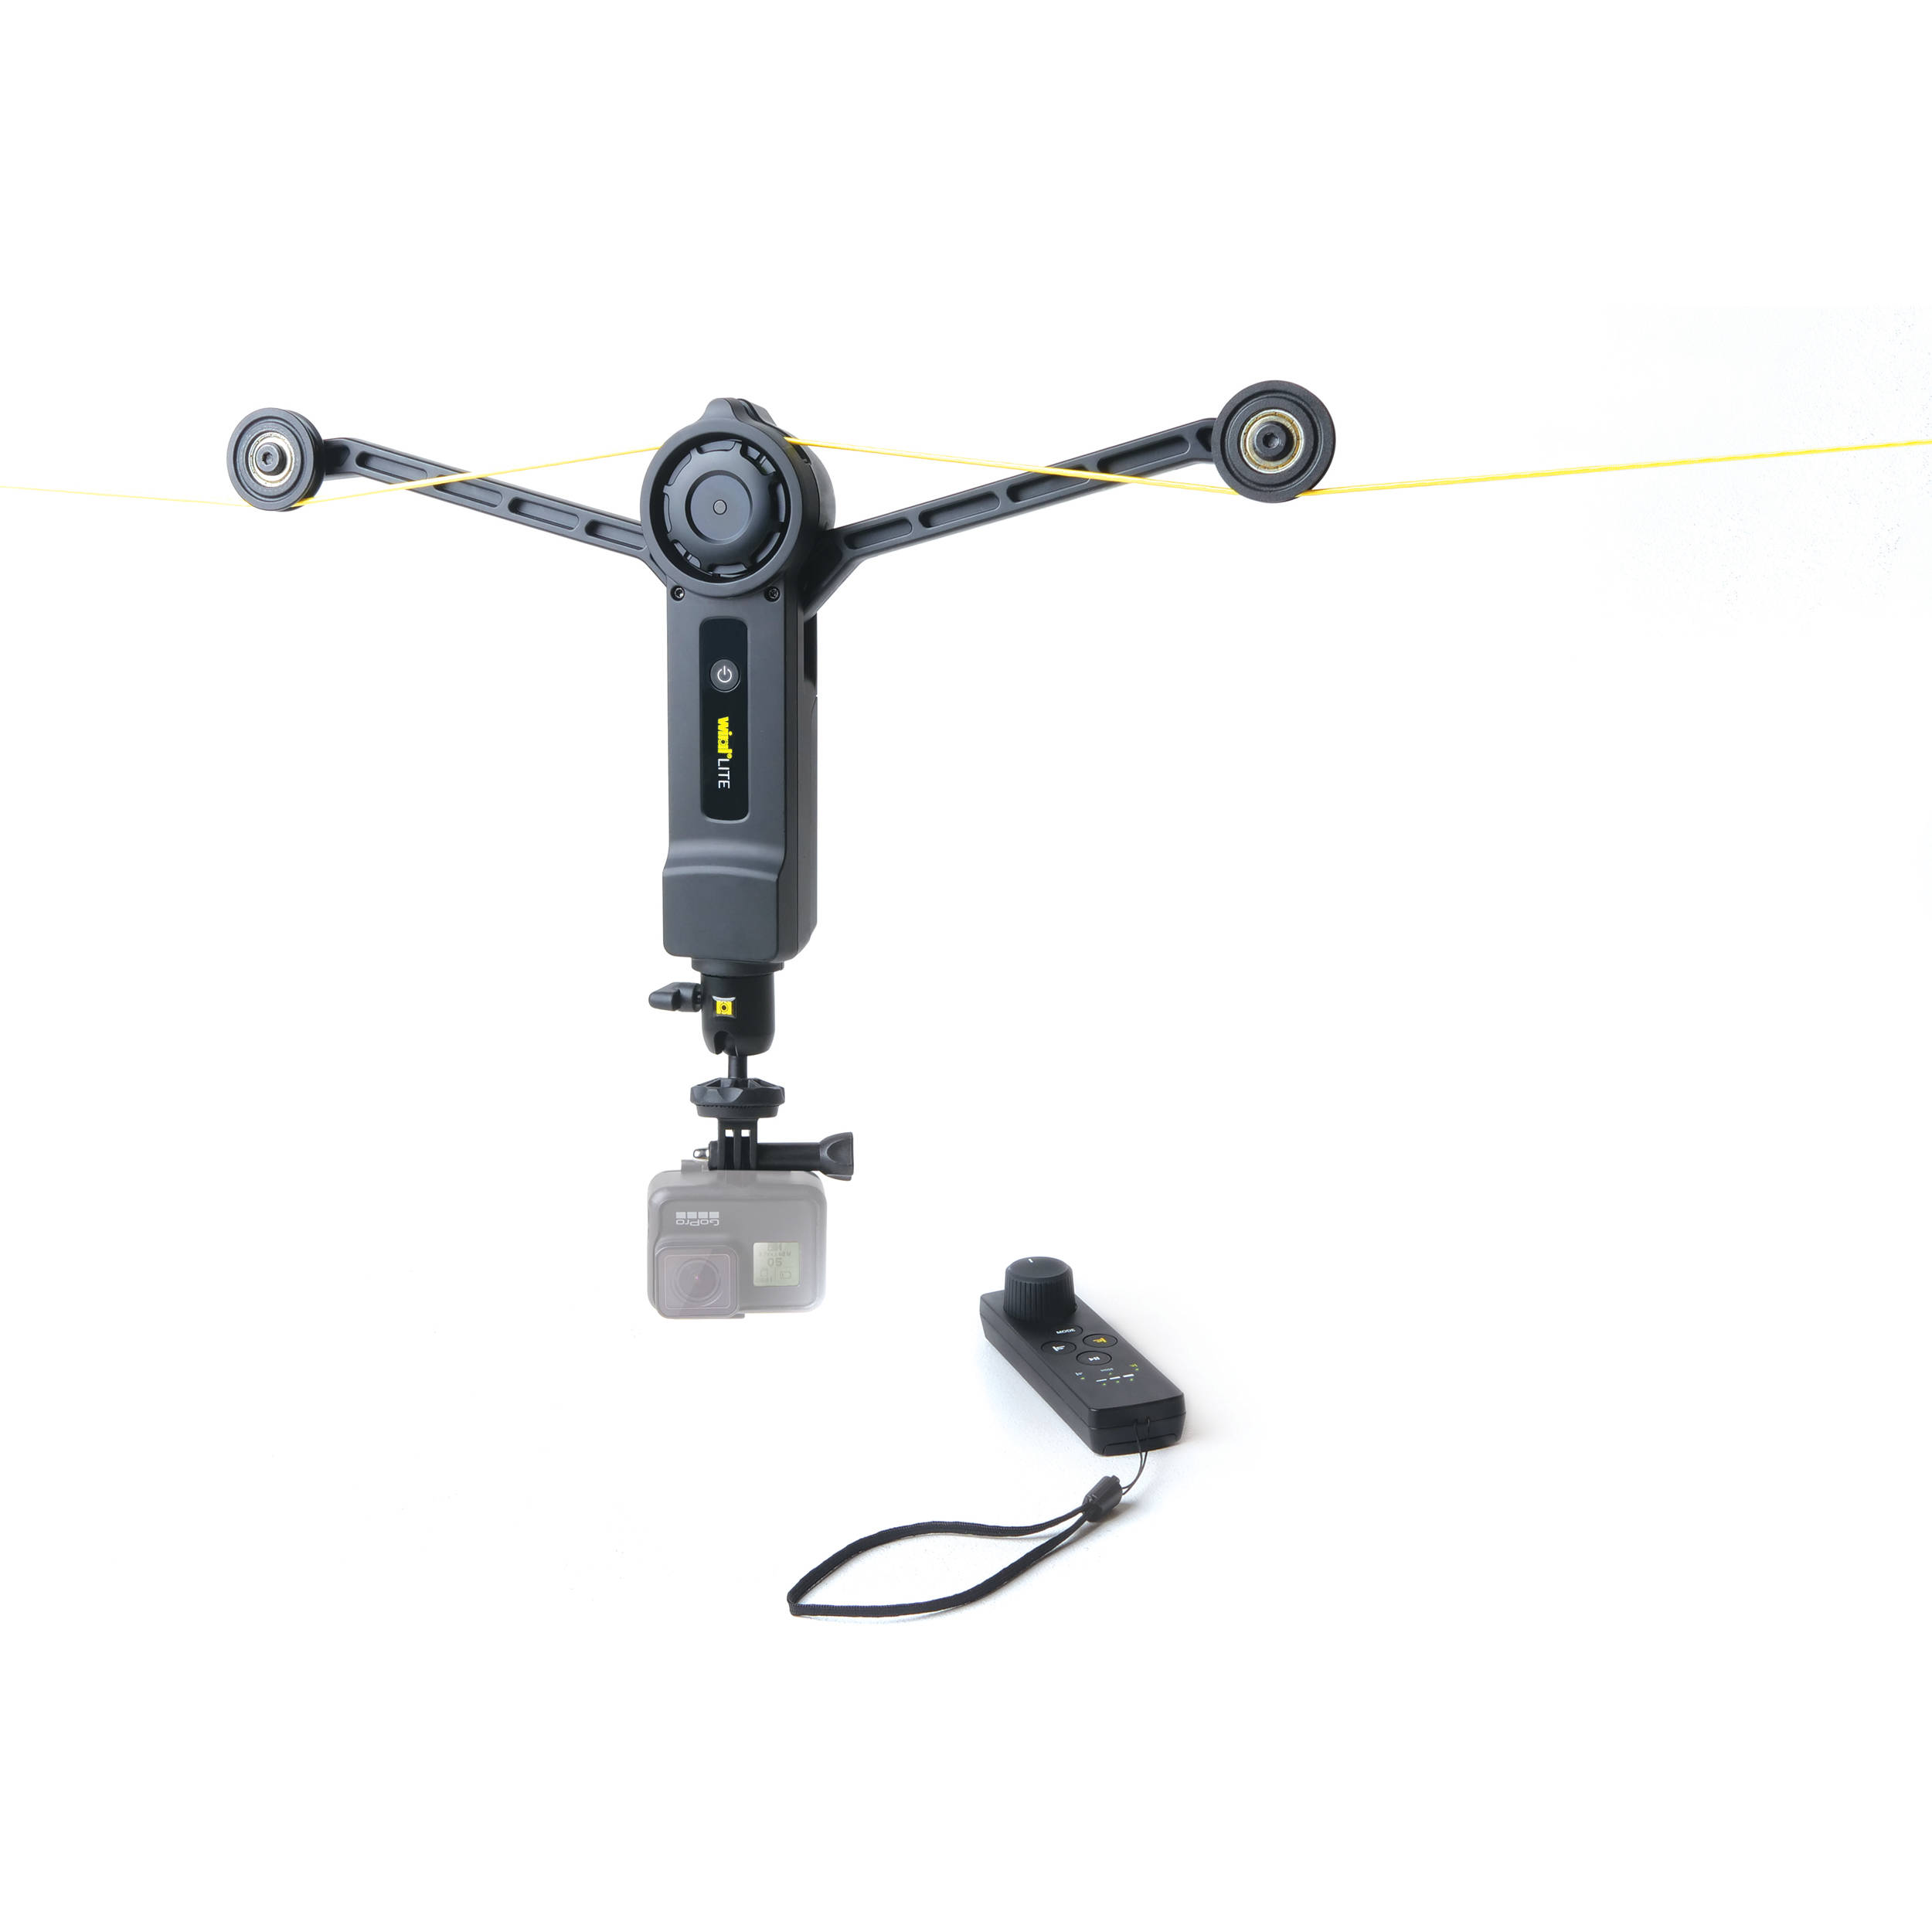 Wiral Lite Cable Camera Motion System Lite B H Photo Video